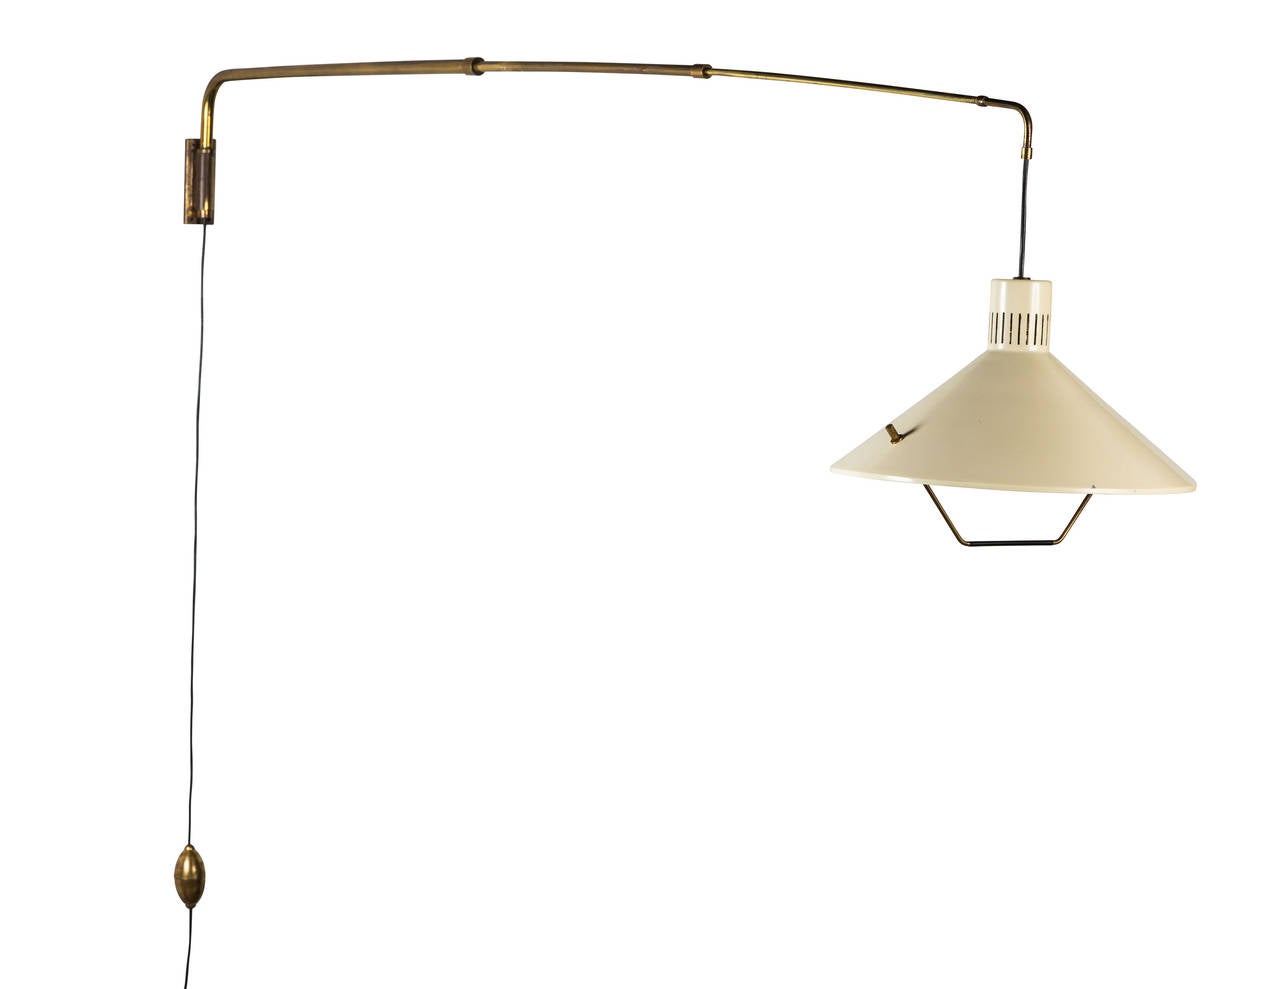 Articulating wall light with solid brass hand switch. Retains original label.